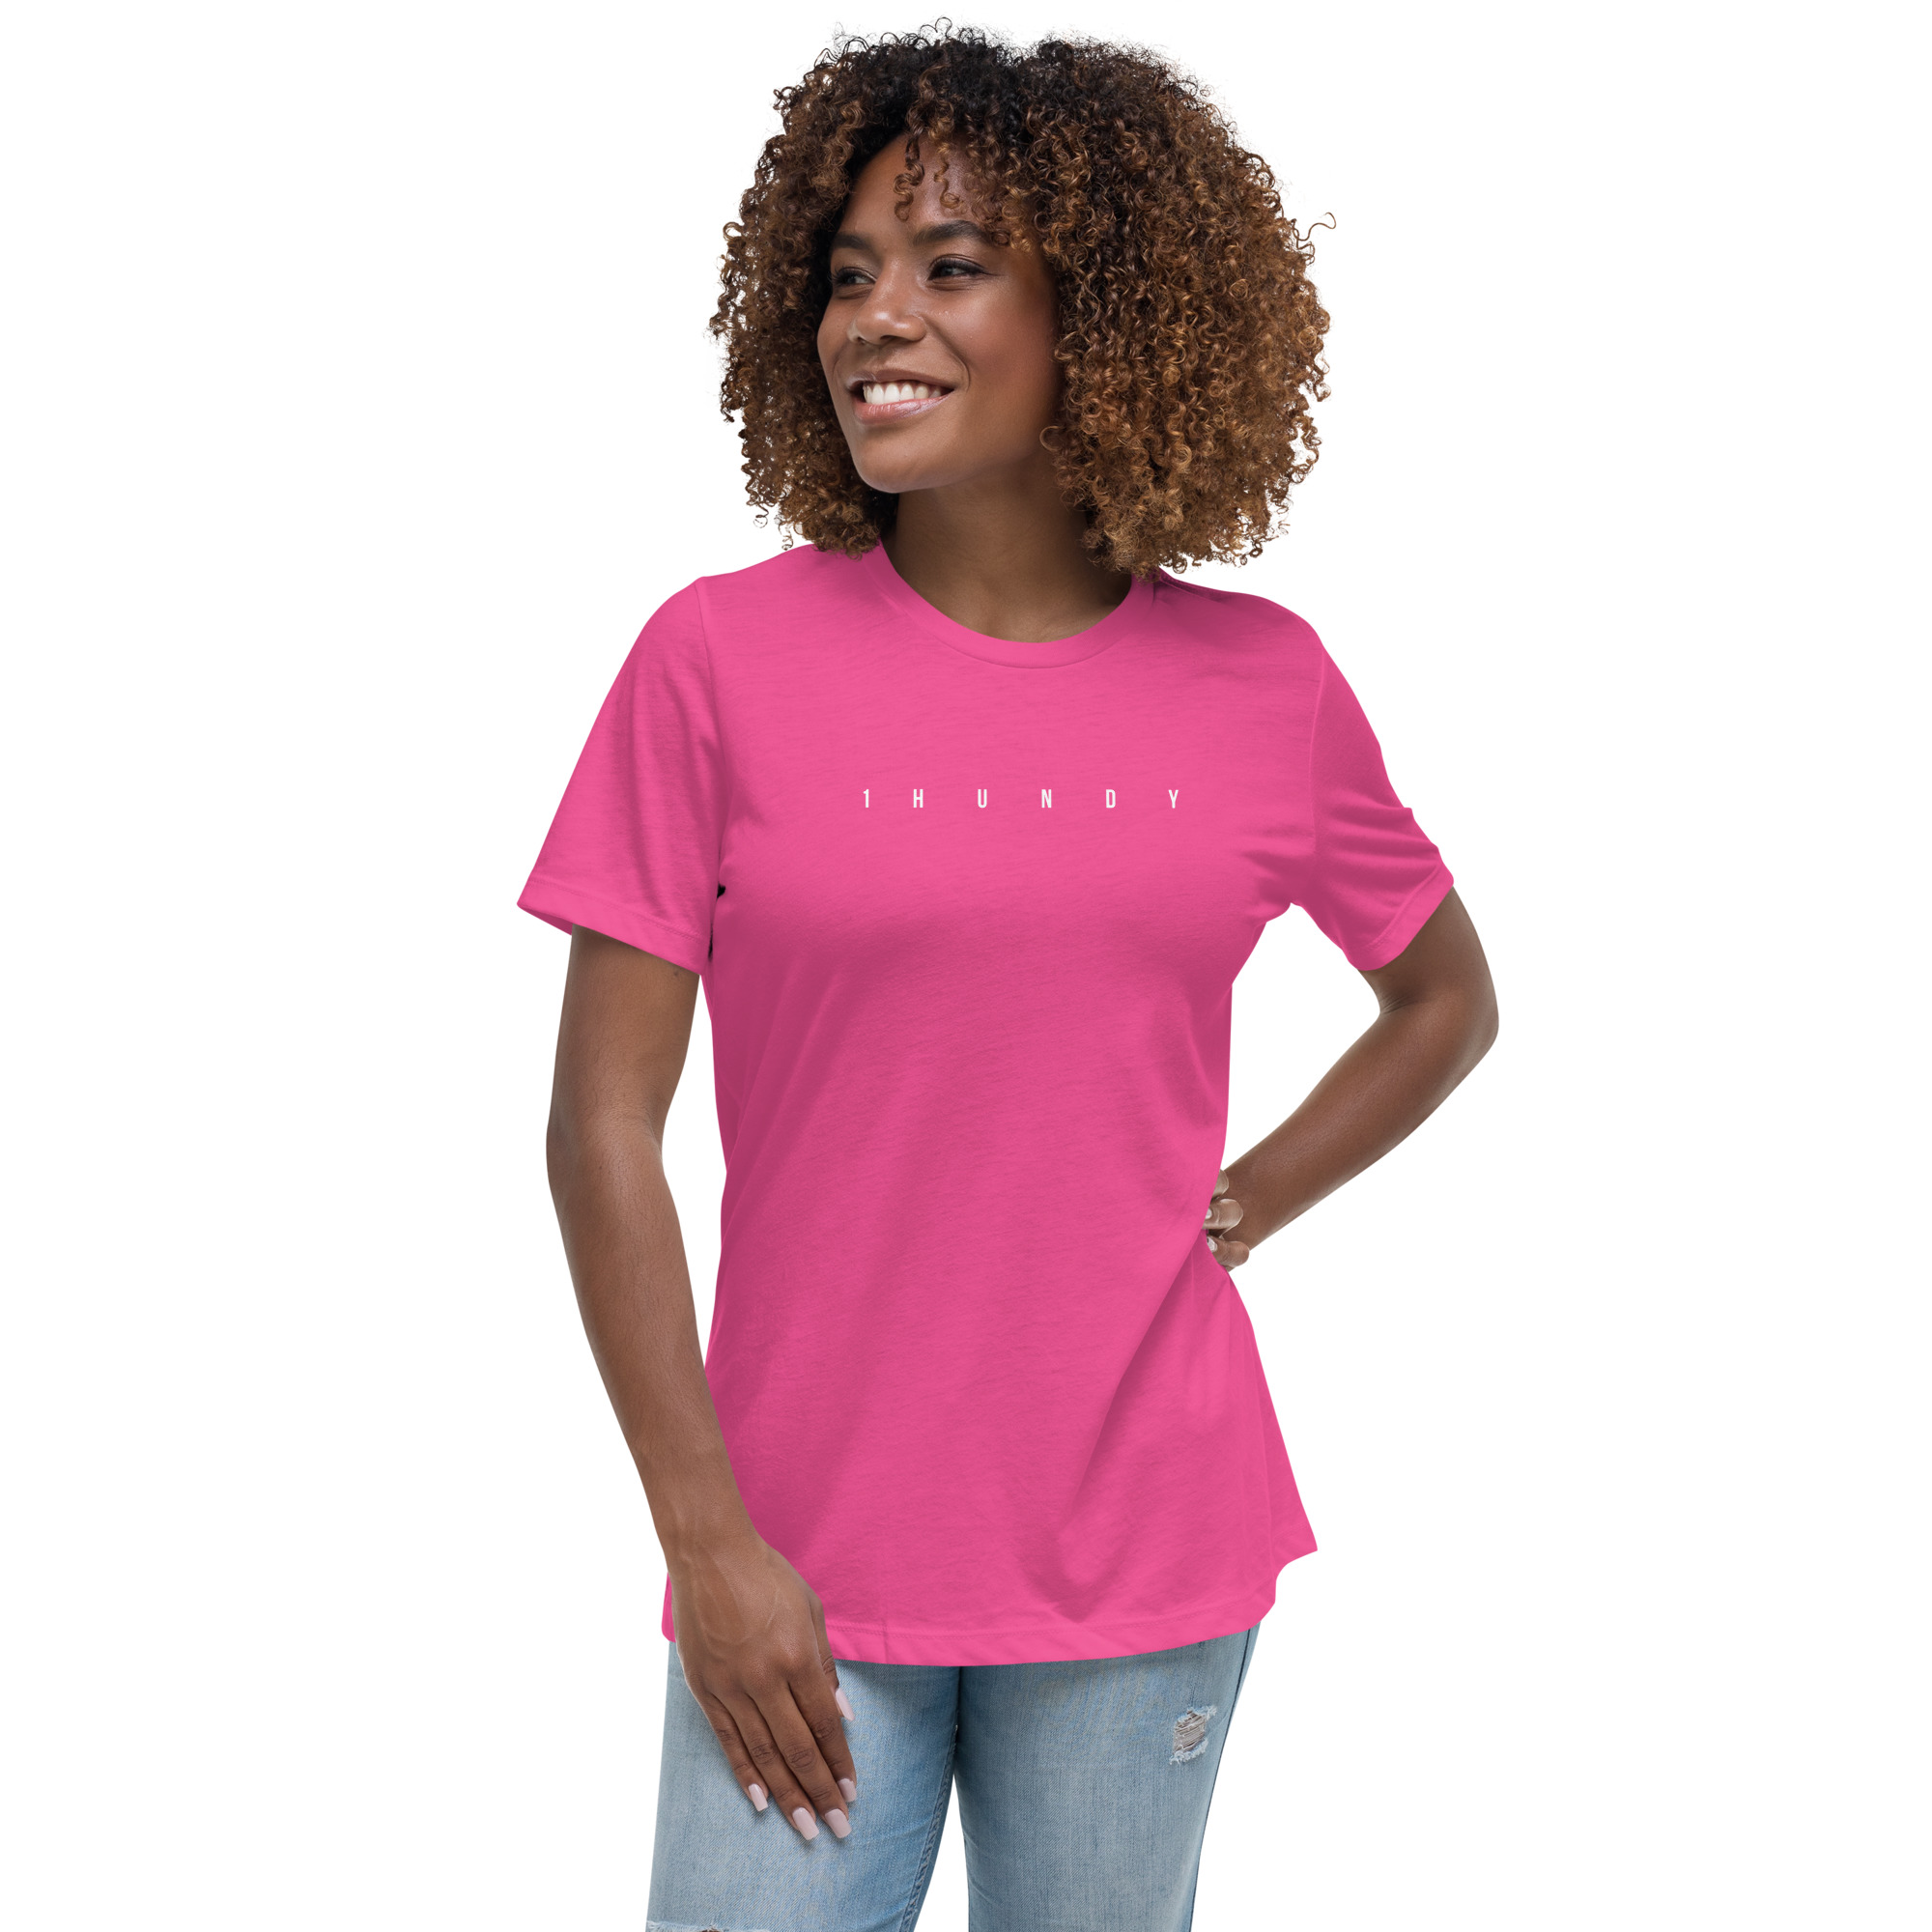 Women's Gym & Fitness T.Shirts by 1HUNDY